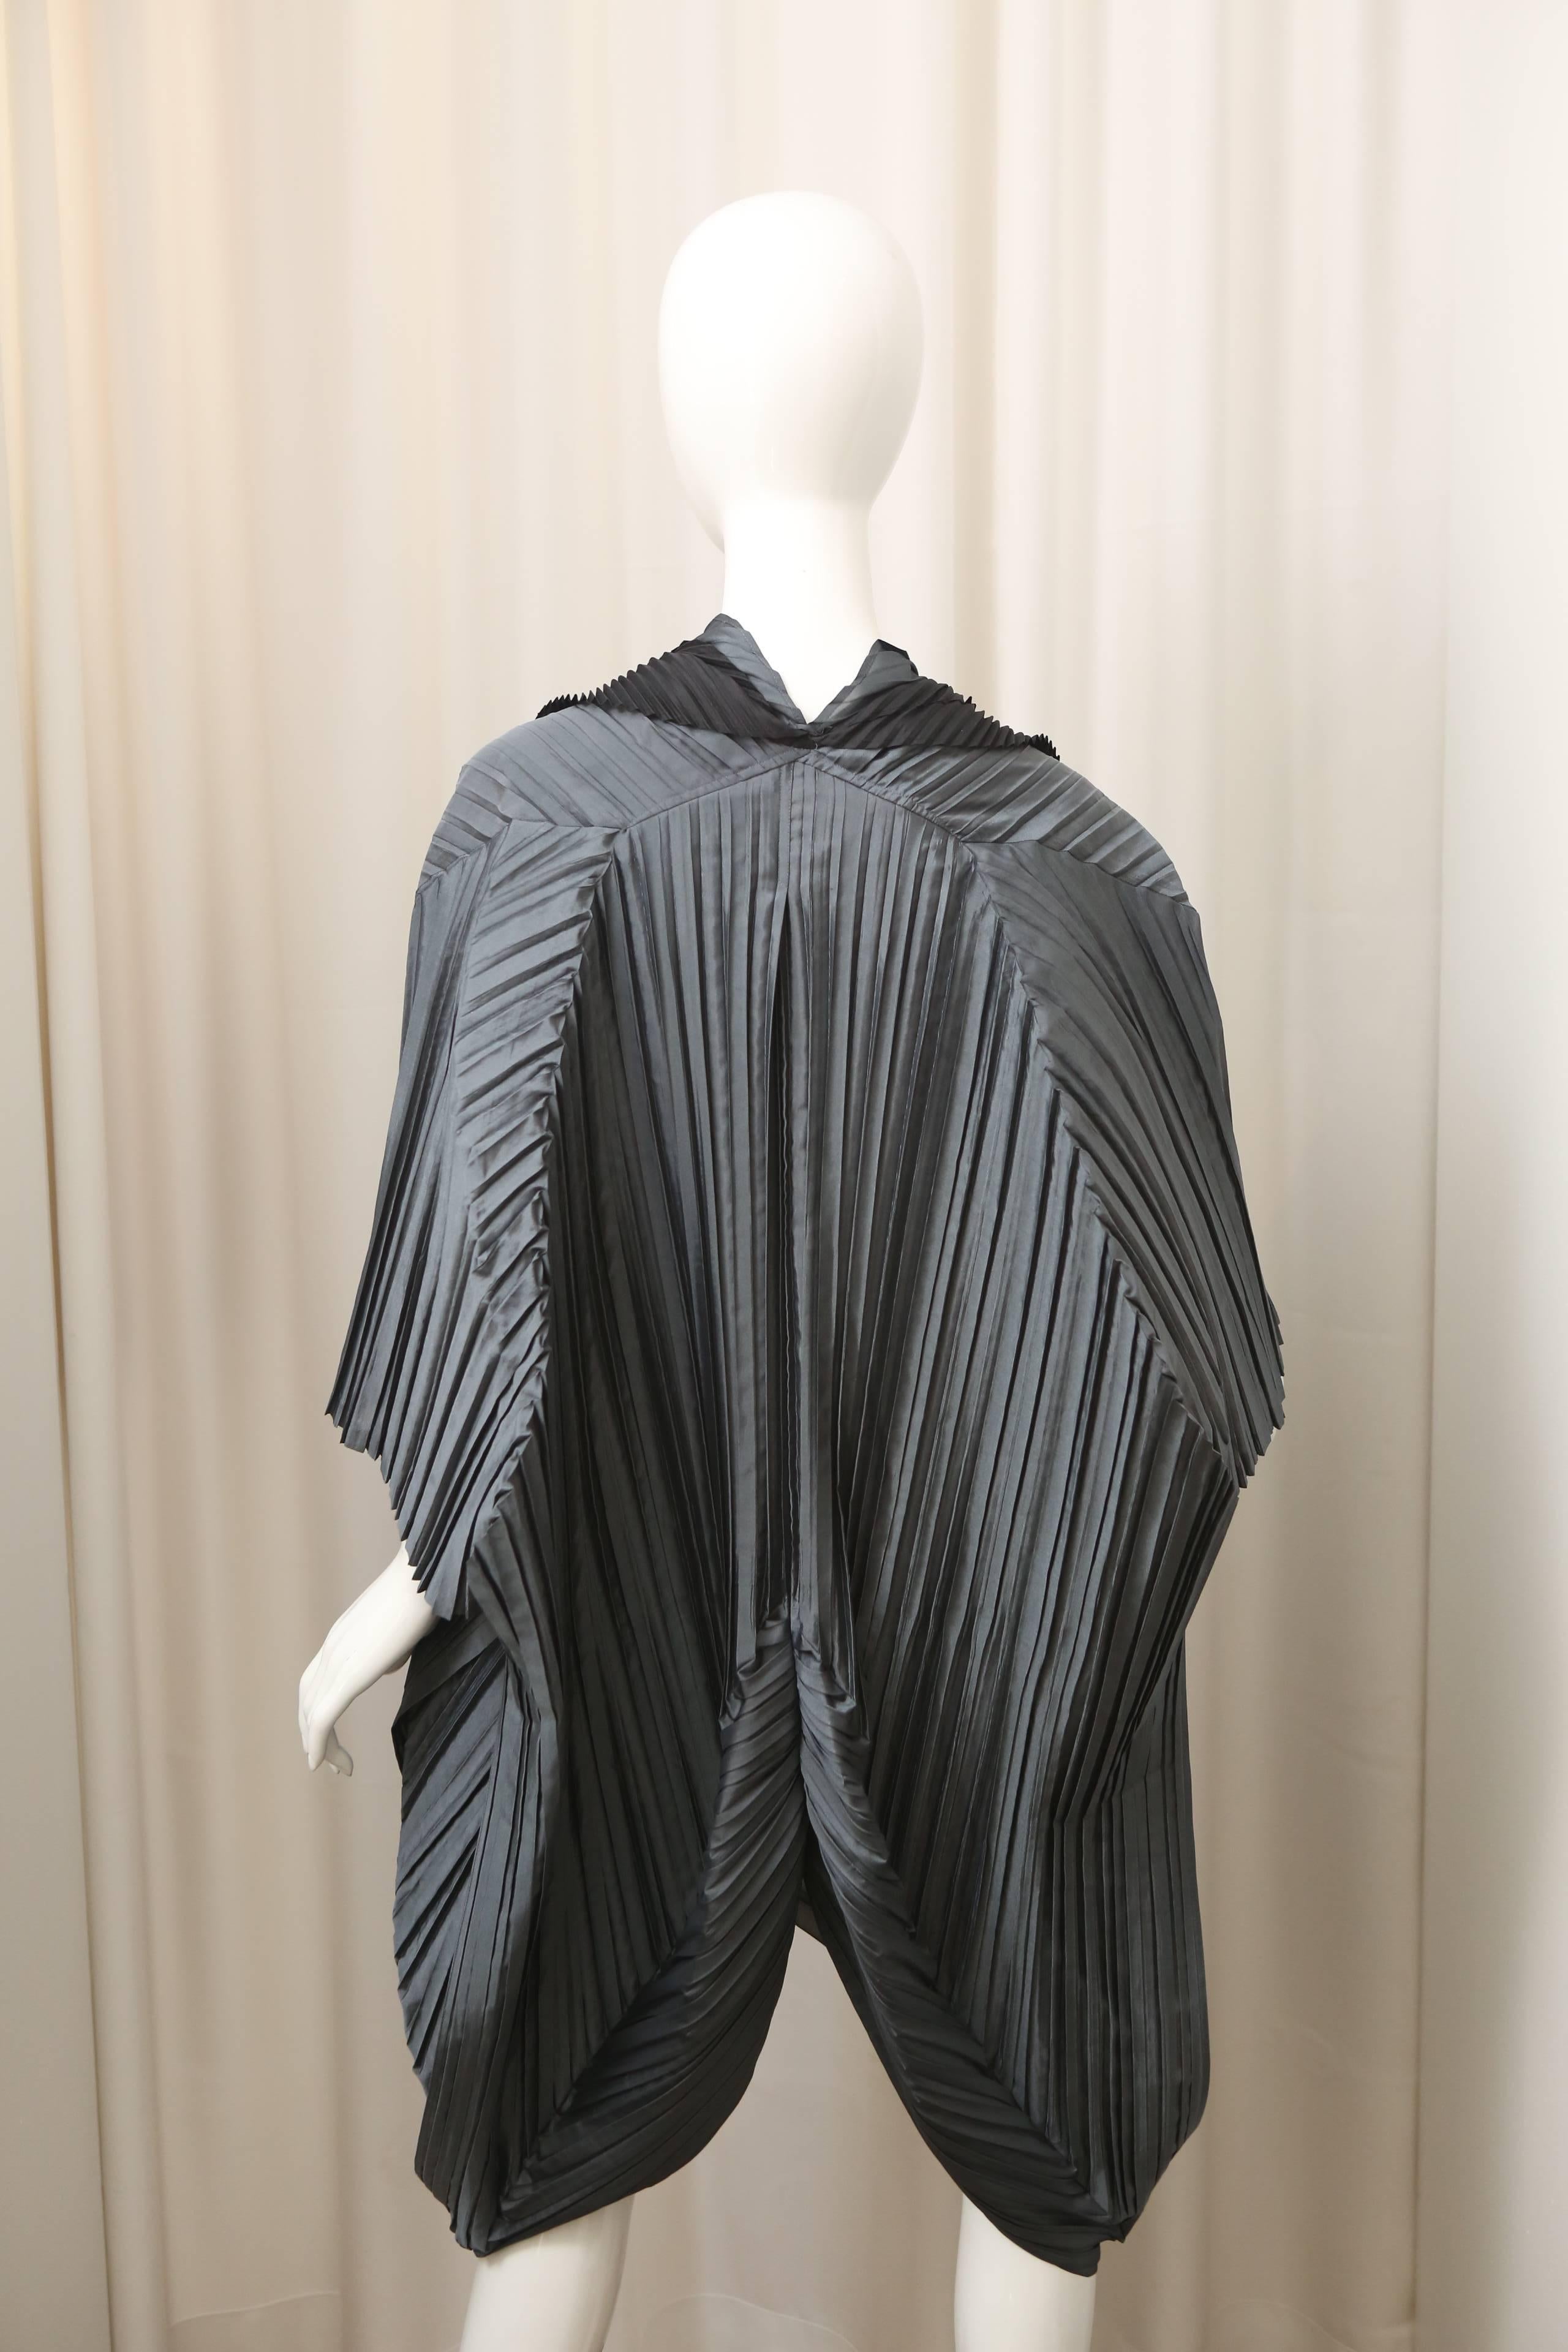 Issey Miyake grey pleated cape style jacket with black detail & button closure.